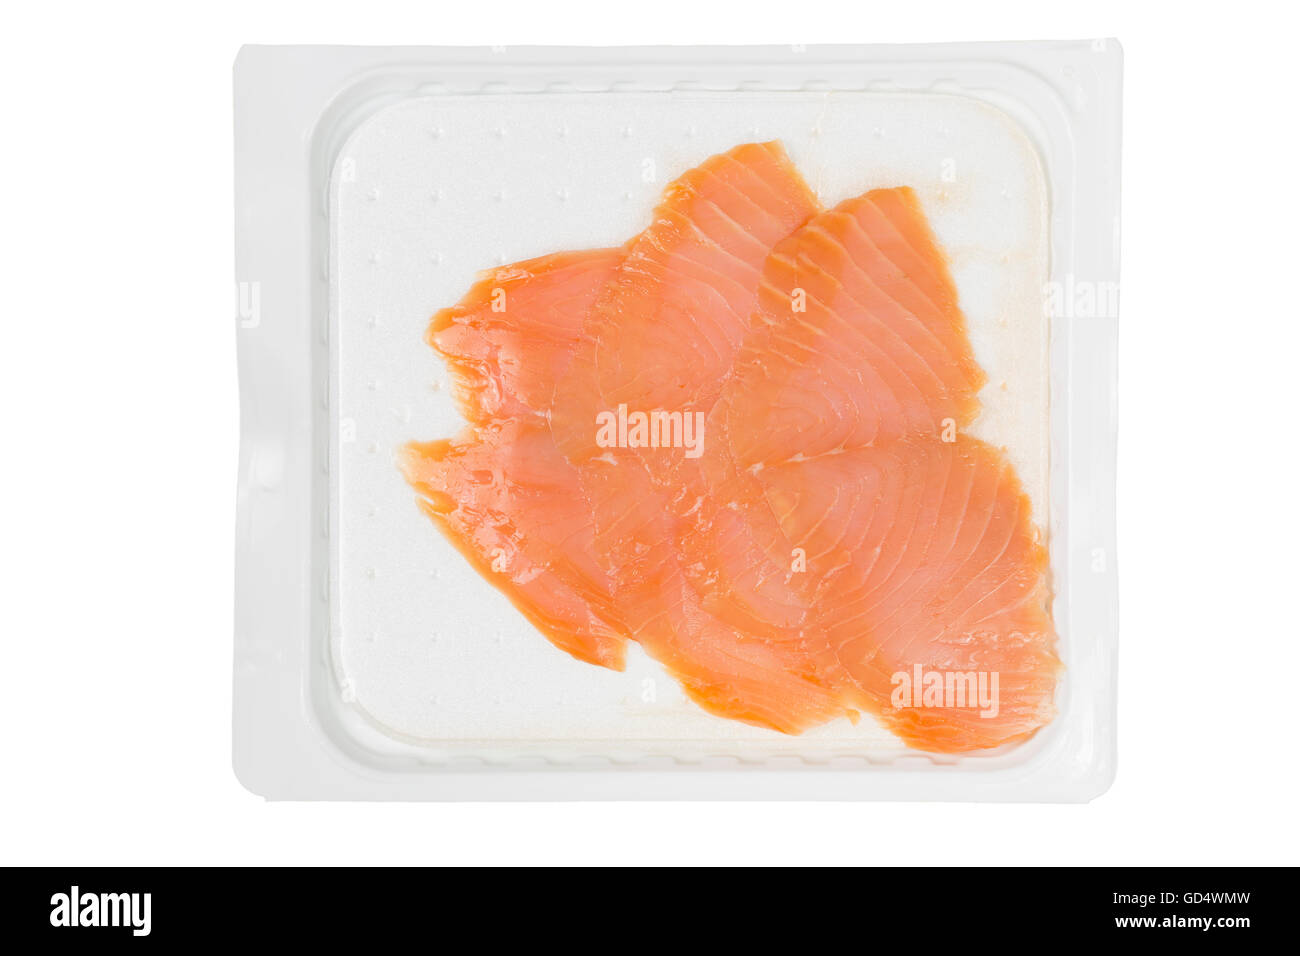 Smoked salmon slices in package isolated on white background Stock Photo